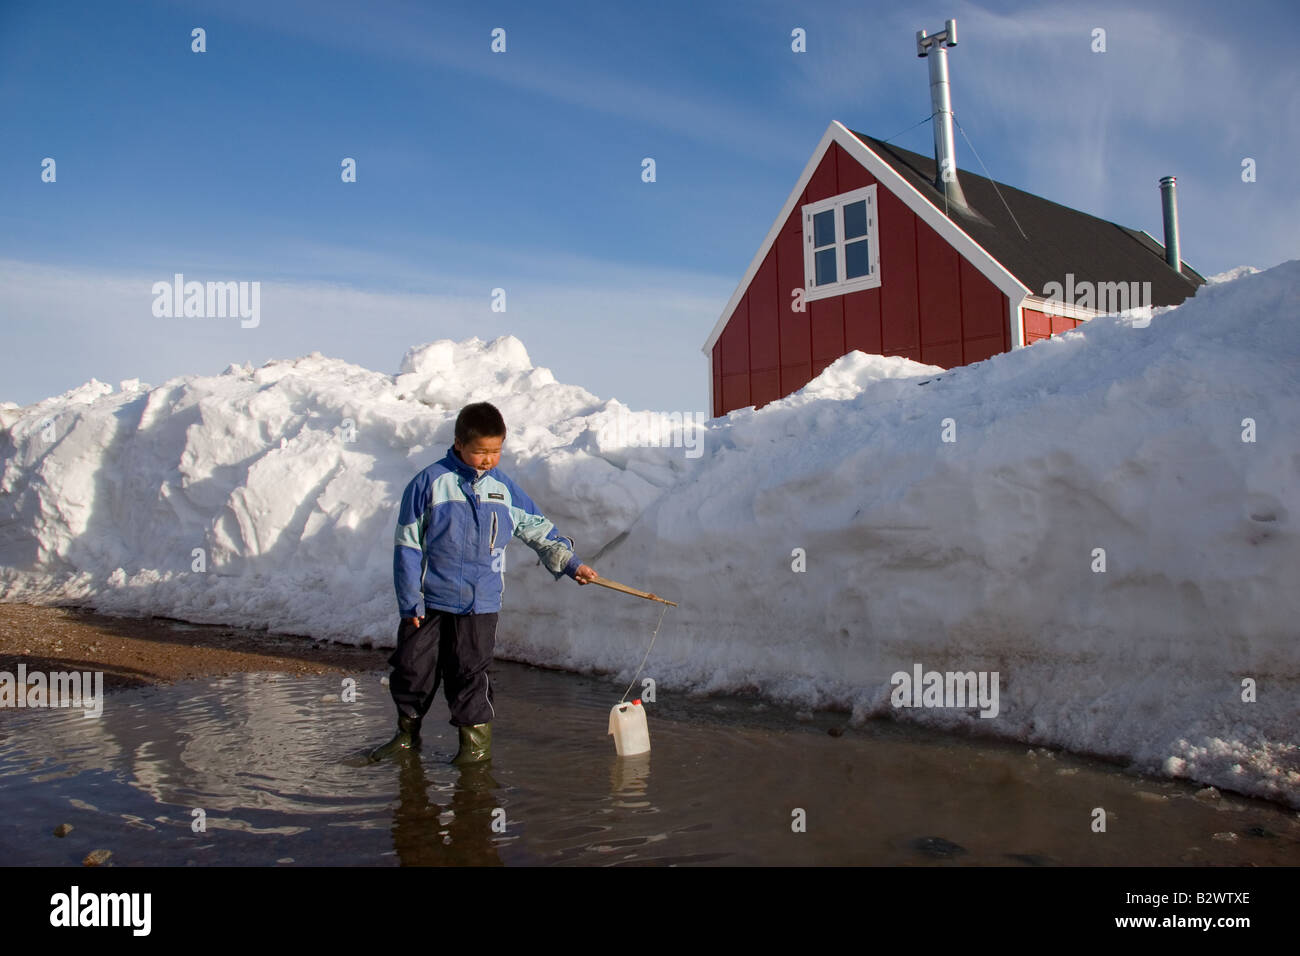 A young Inuit boy plays with an empty carton in a puddle in the village of Ittoqqortoormiit, Scoresbysund, East Greenland Stock Photo